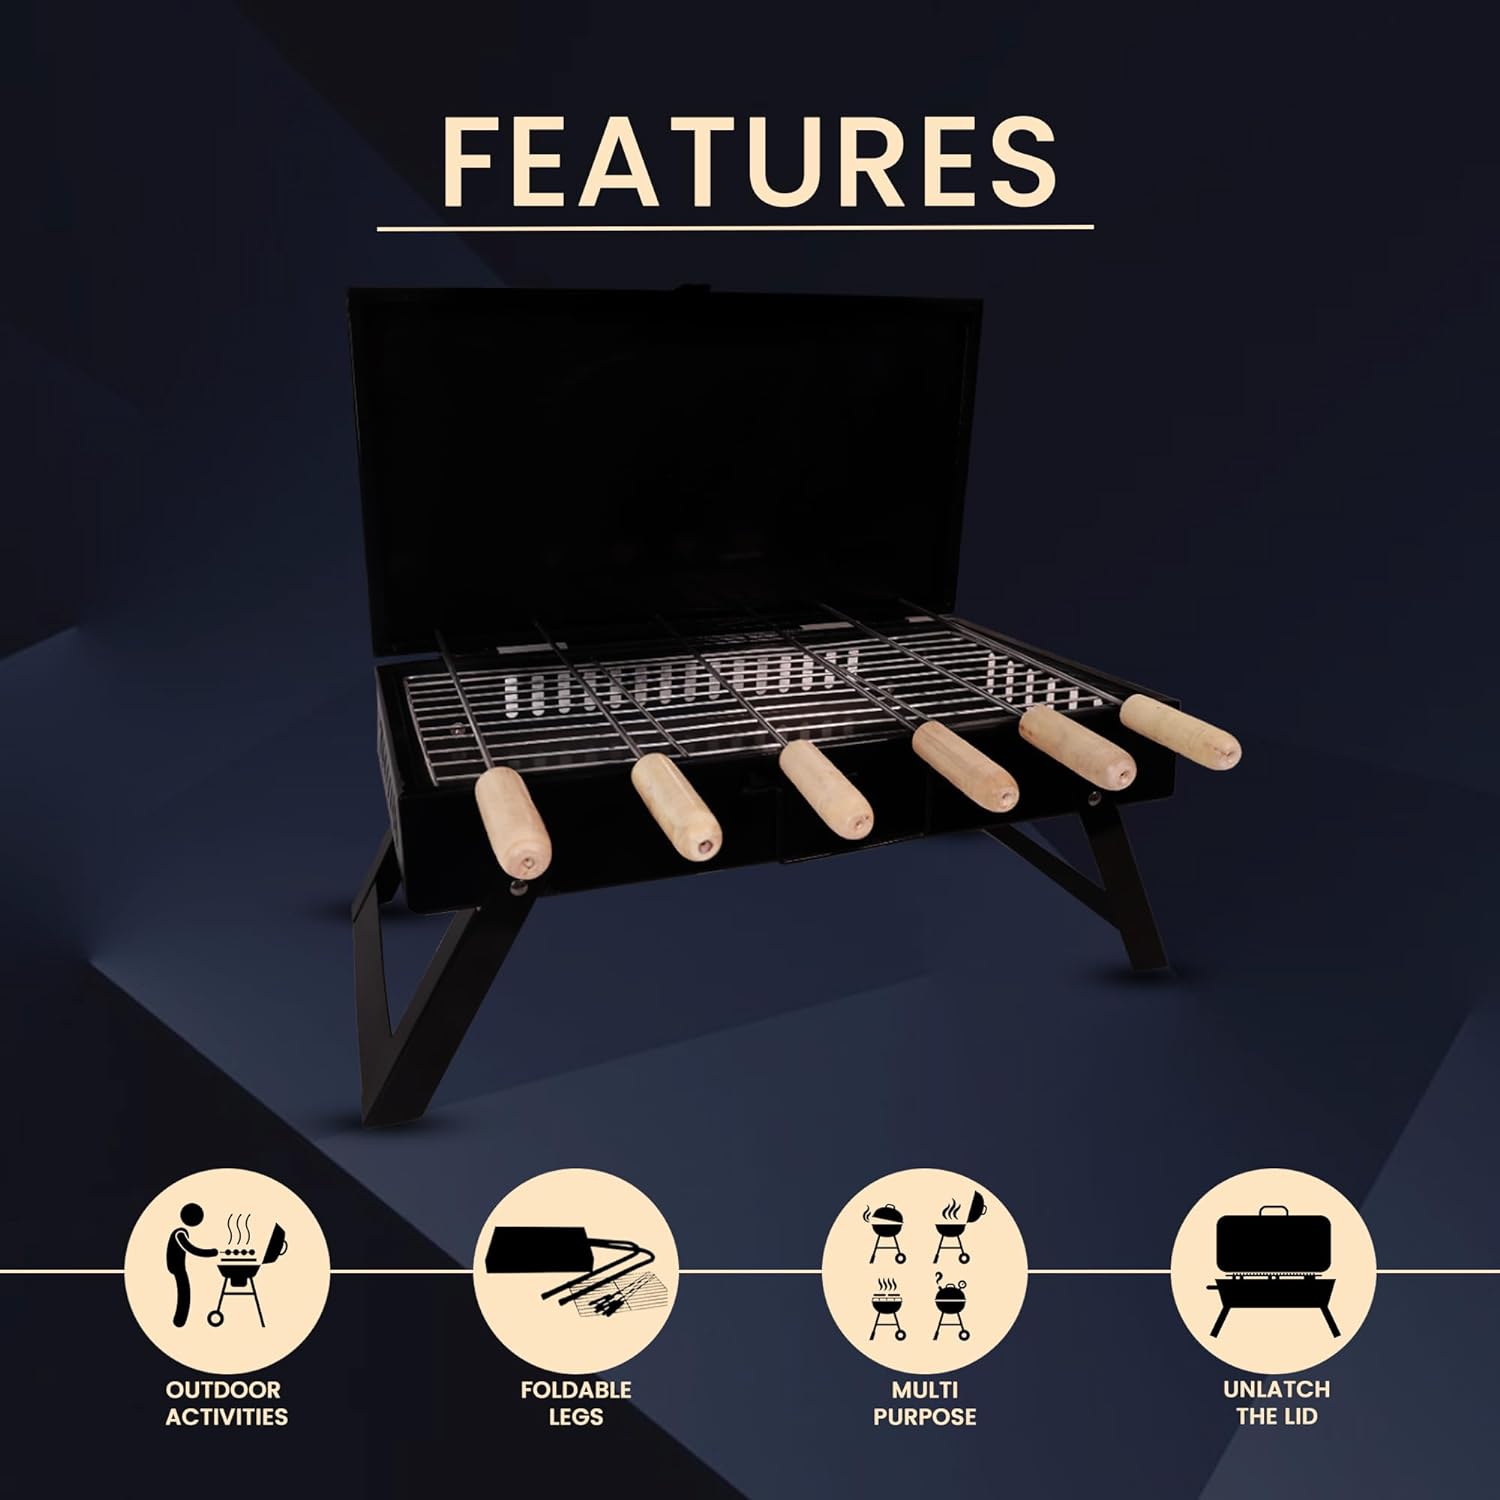 GrillPorter Briefcase Barbeque with Lid and Accessories | Barbeque with 6 skewers, Tong, &Wooden Cleaning Brush